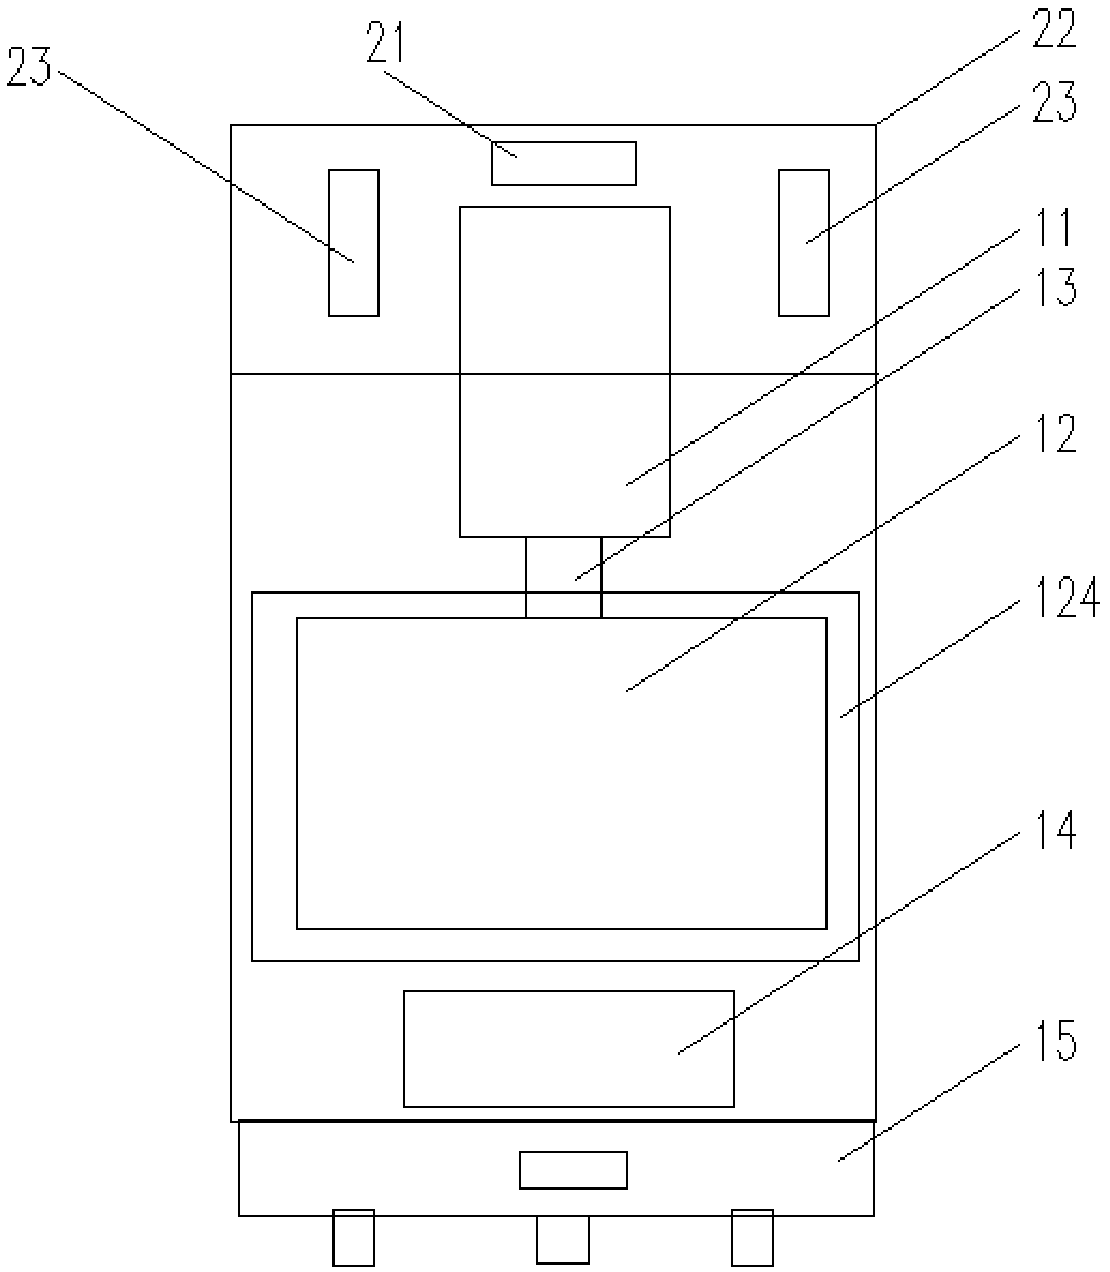 Control method and device for movable air conditioner